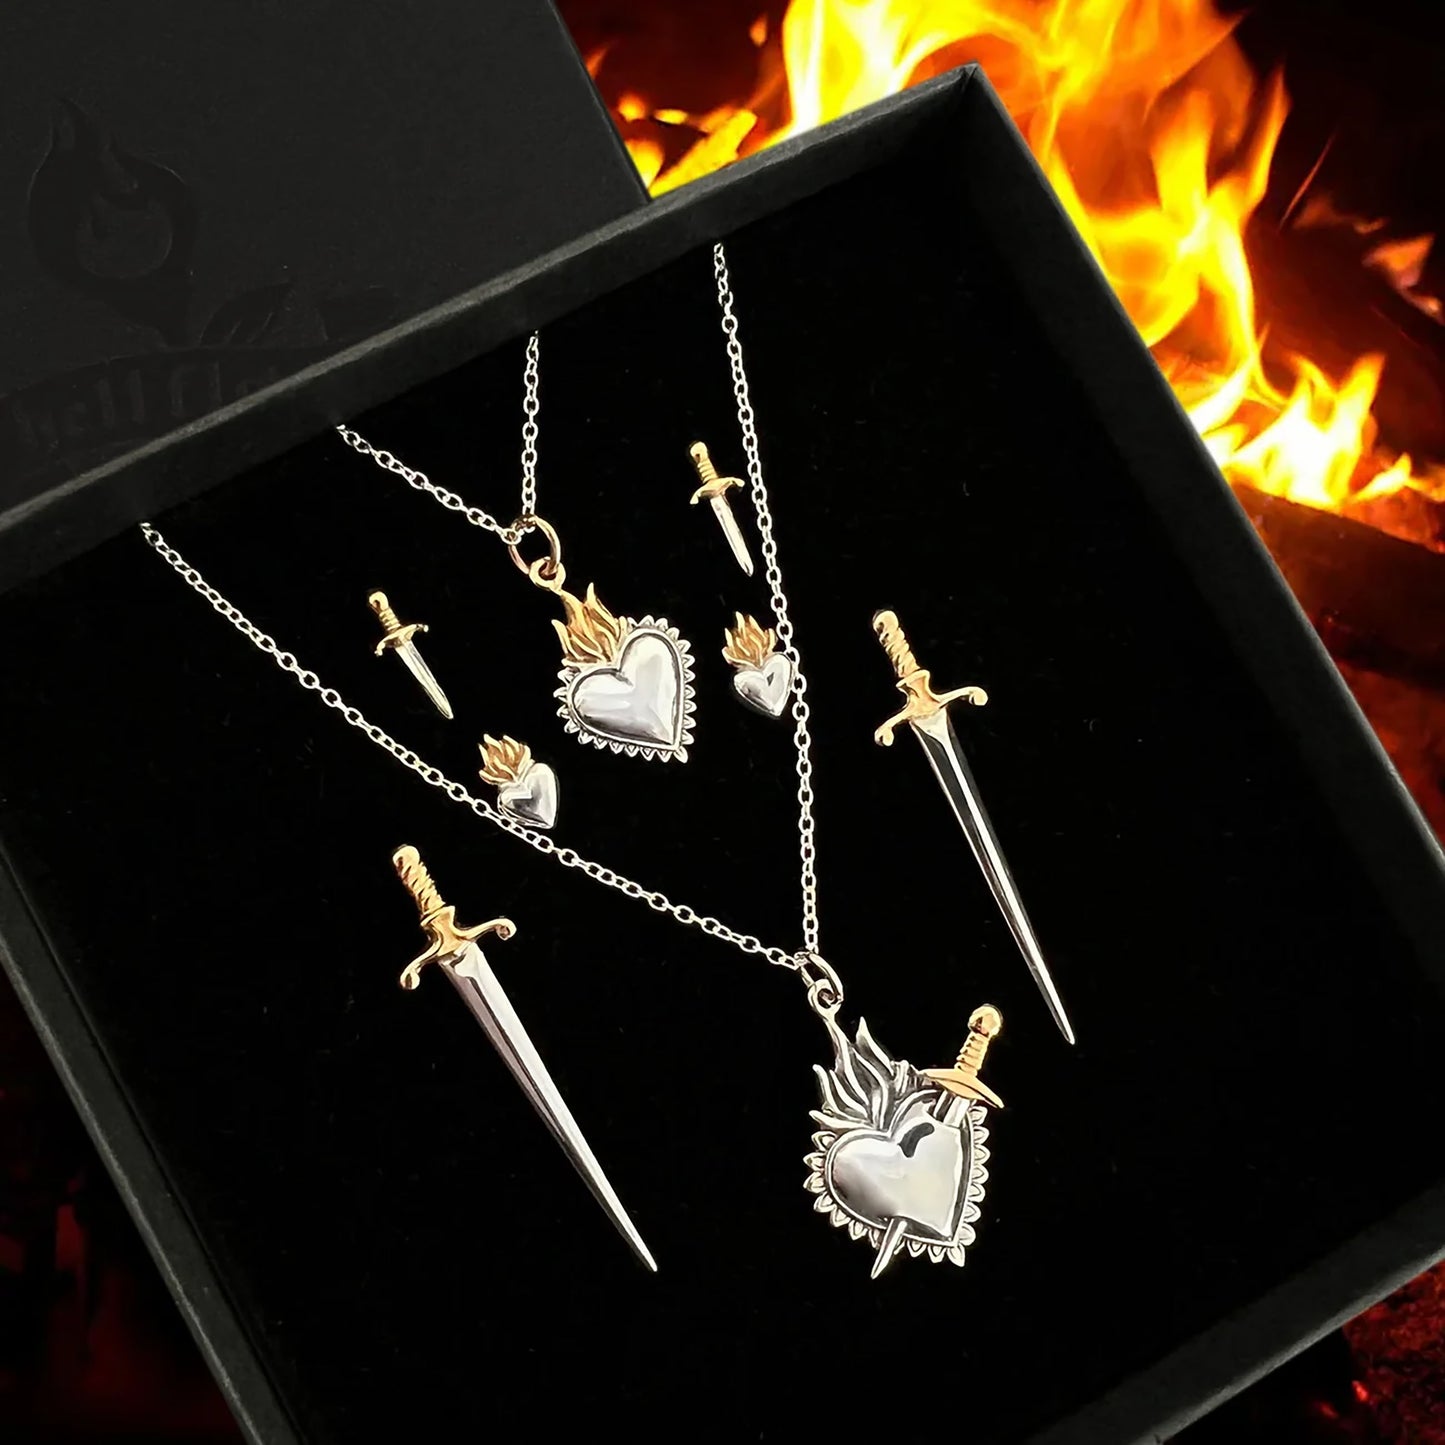 Flaming Heart & Dagger Necklace